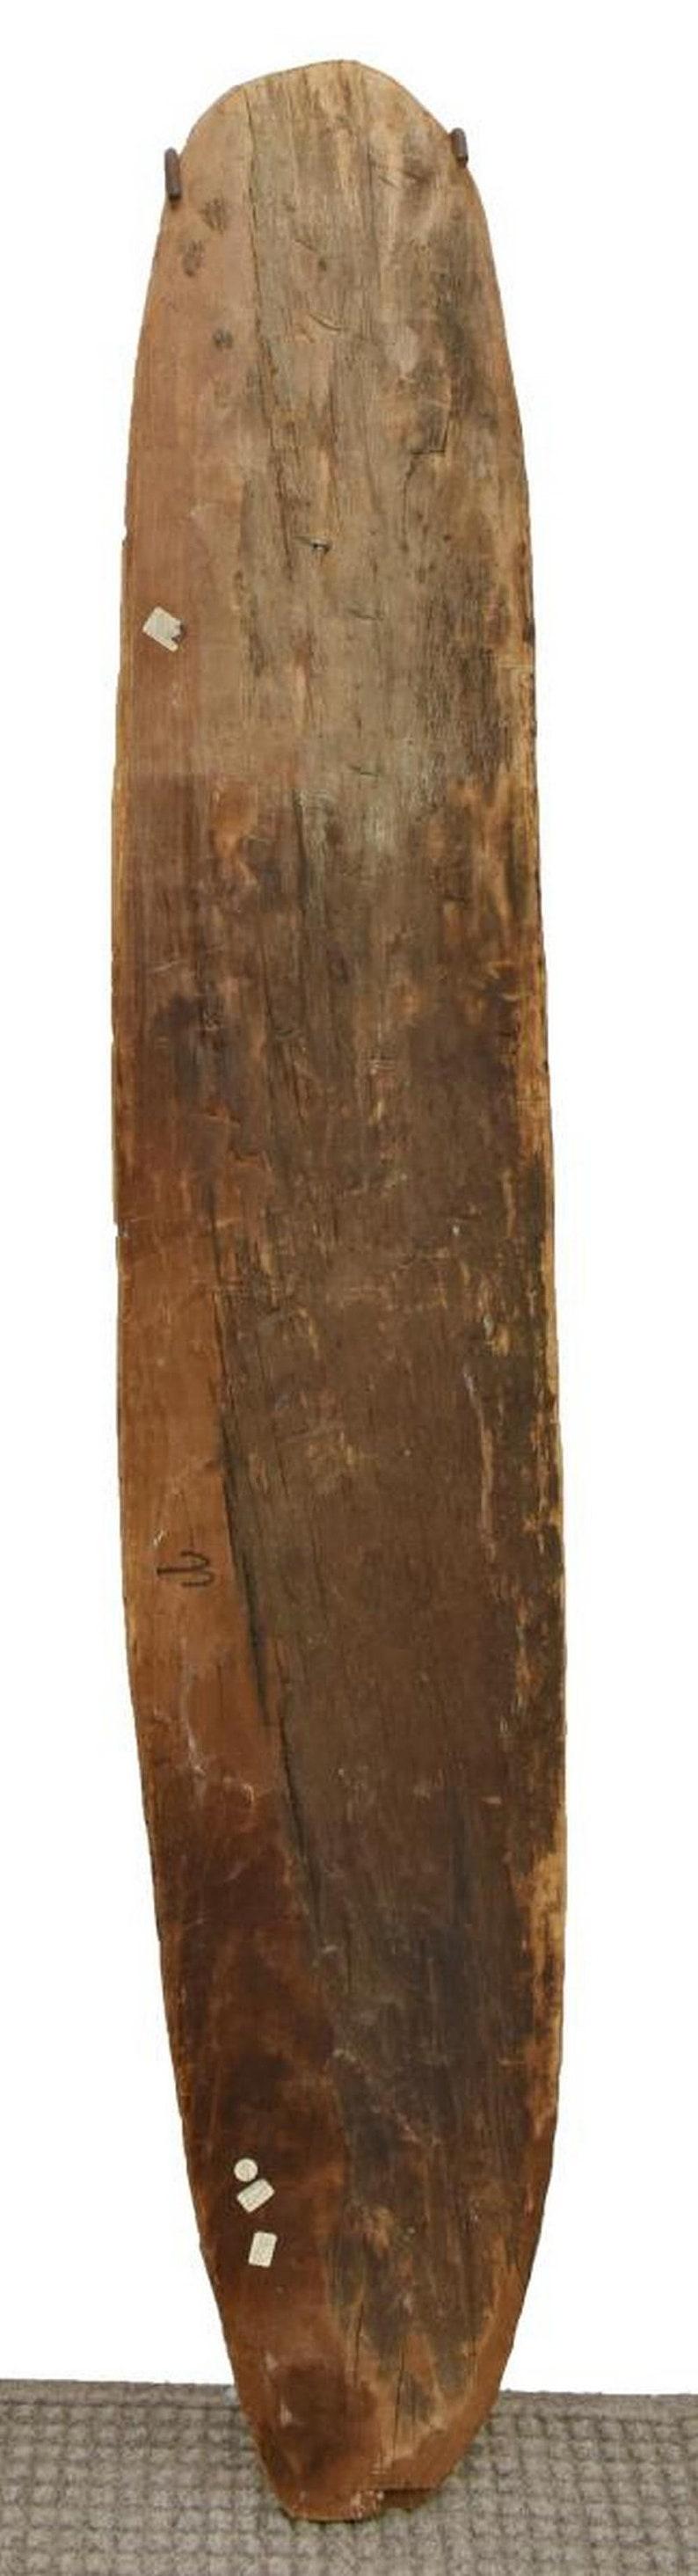 Papua New Guinean Large Oceanic Gope Carved Wooden Ancestor Spirit Board For Sale